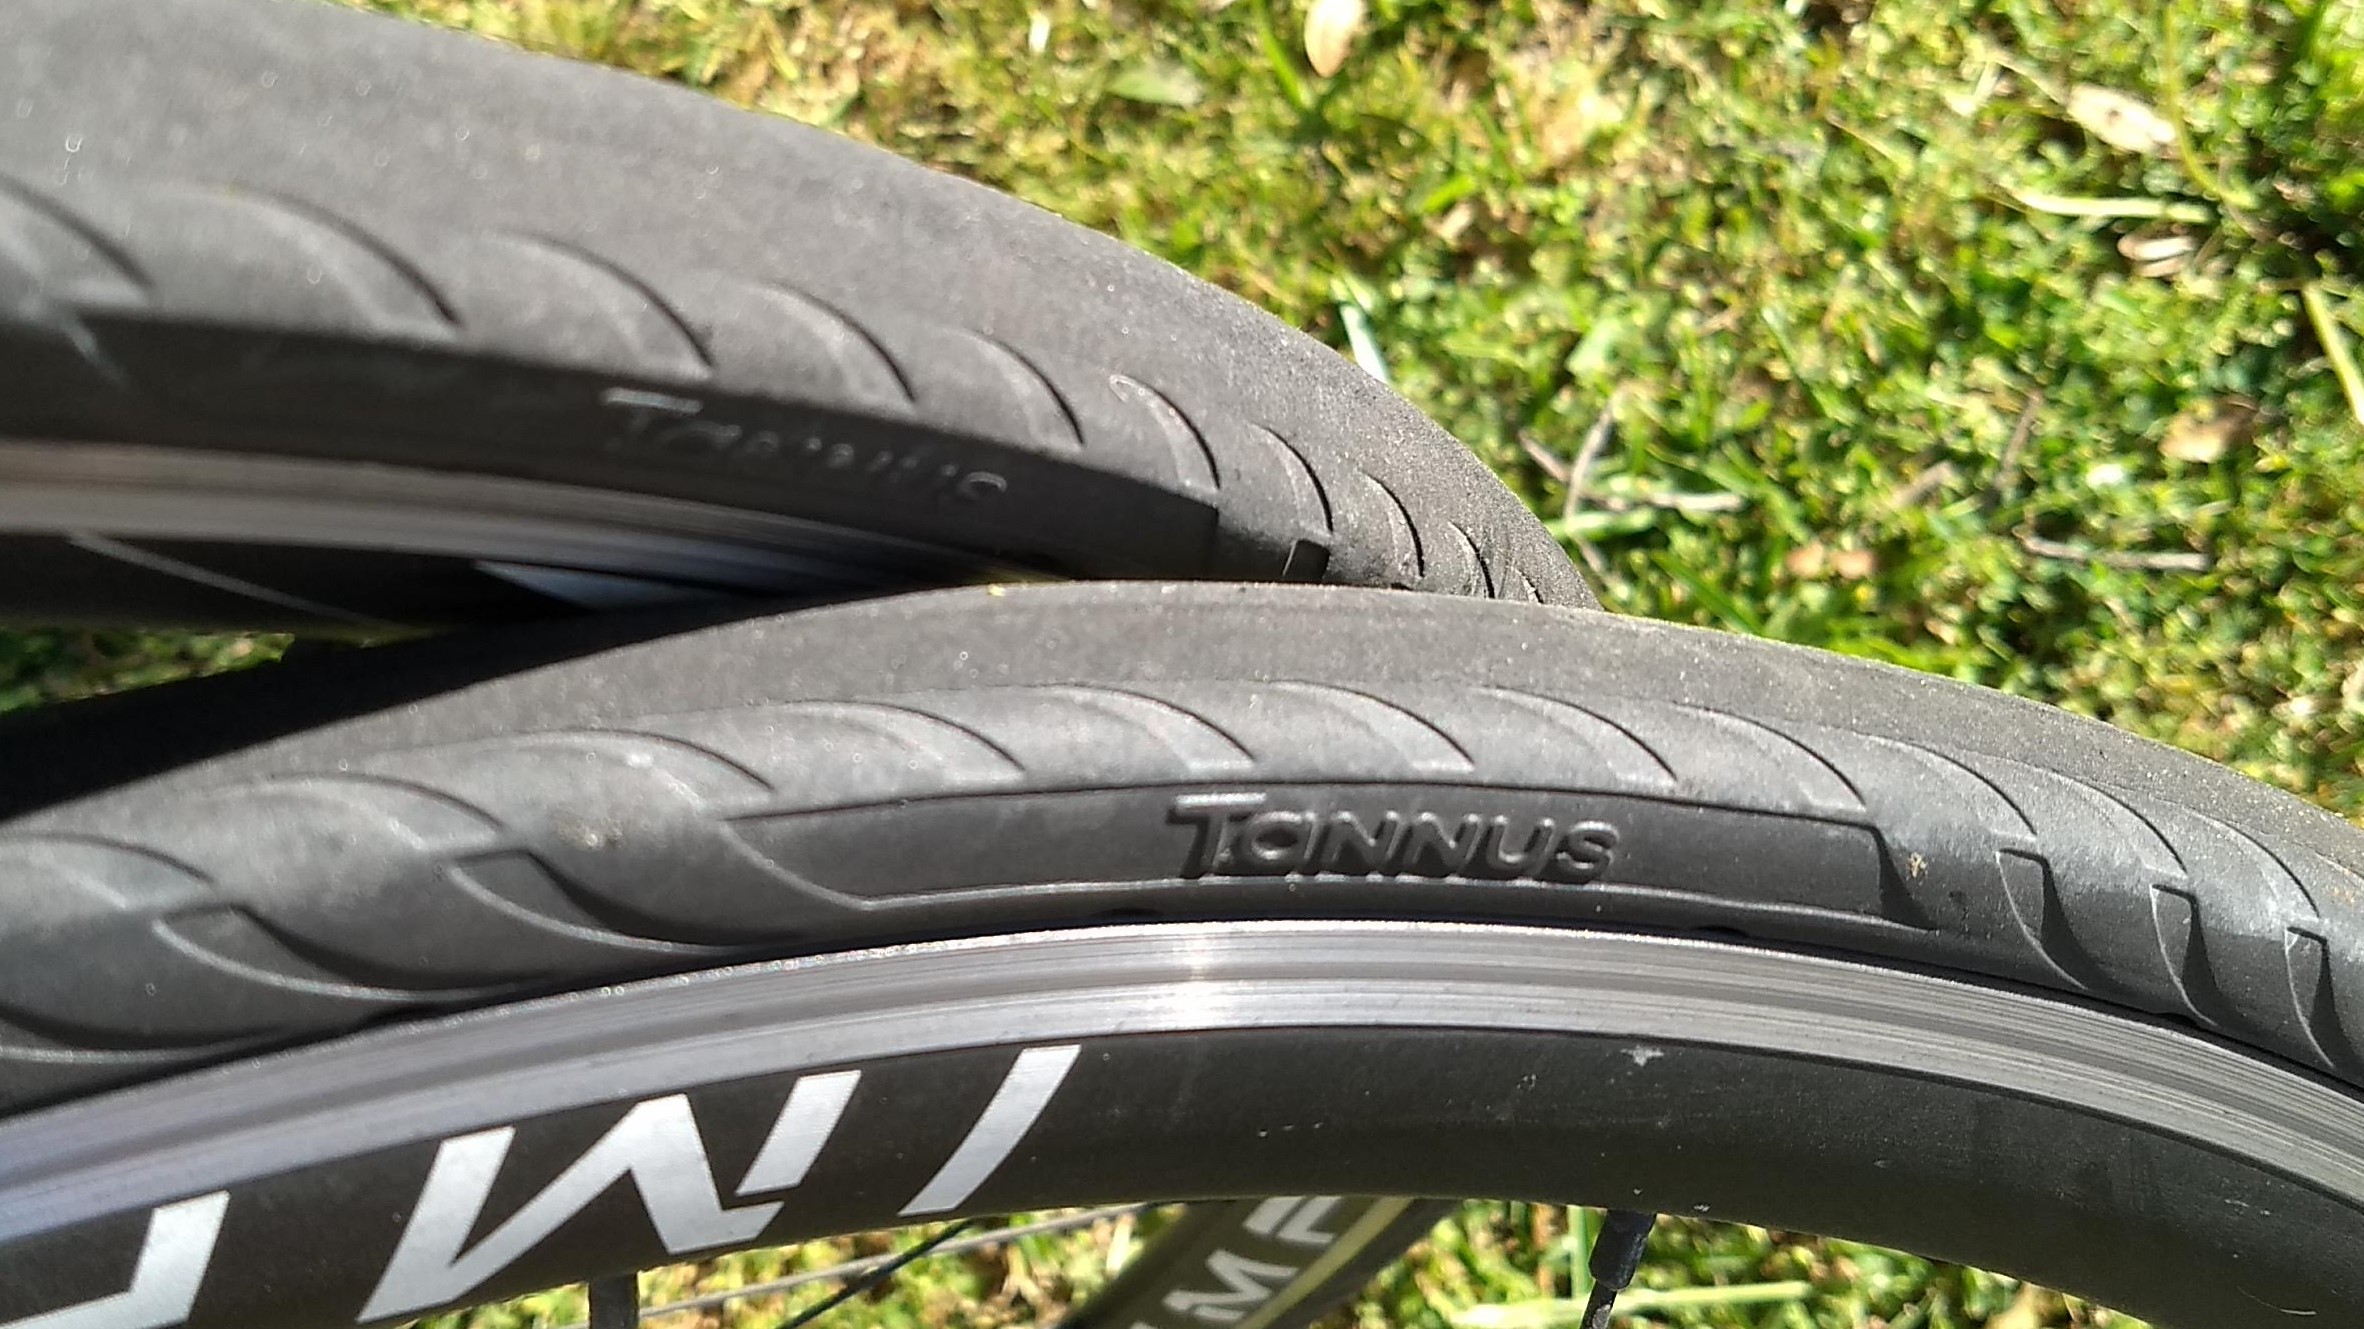 Tannus Airless Solid Tire Review - Aither 1.1 Road 700x25